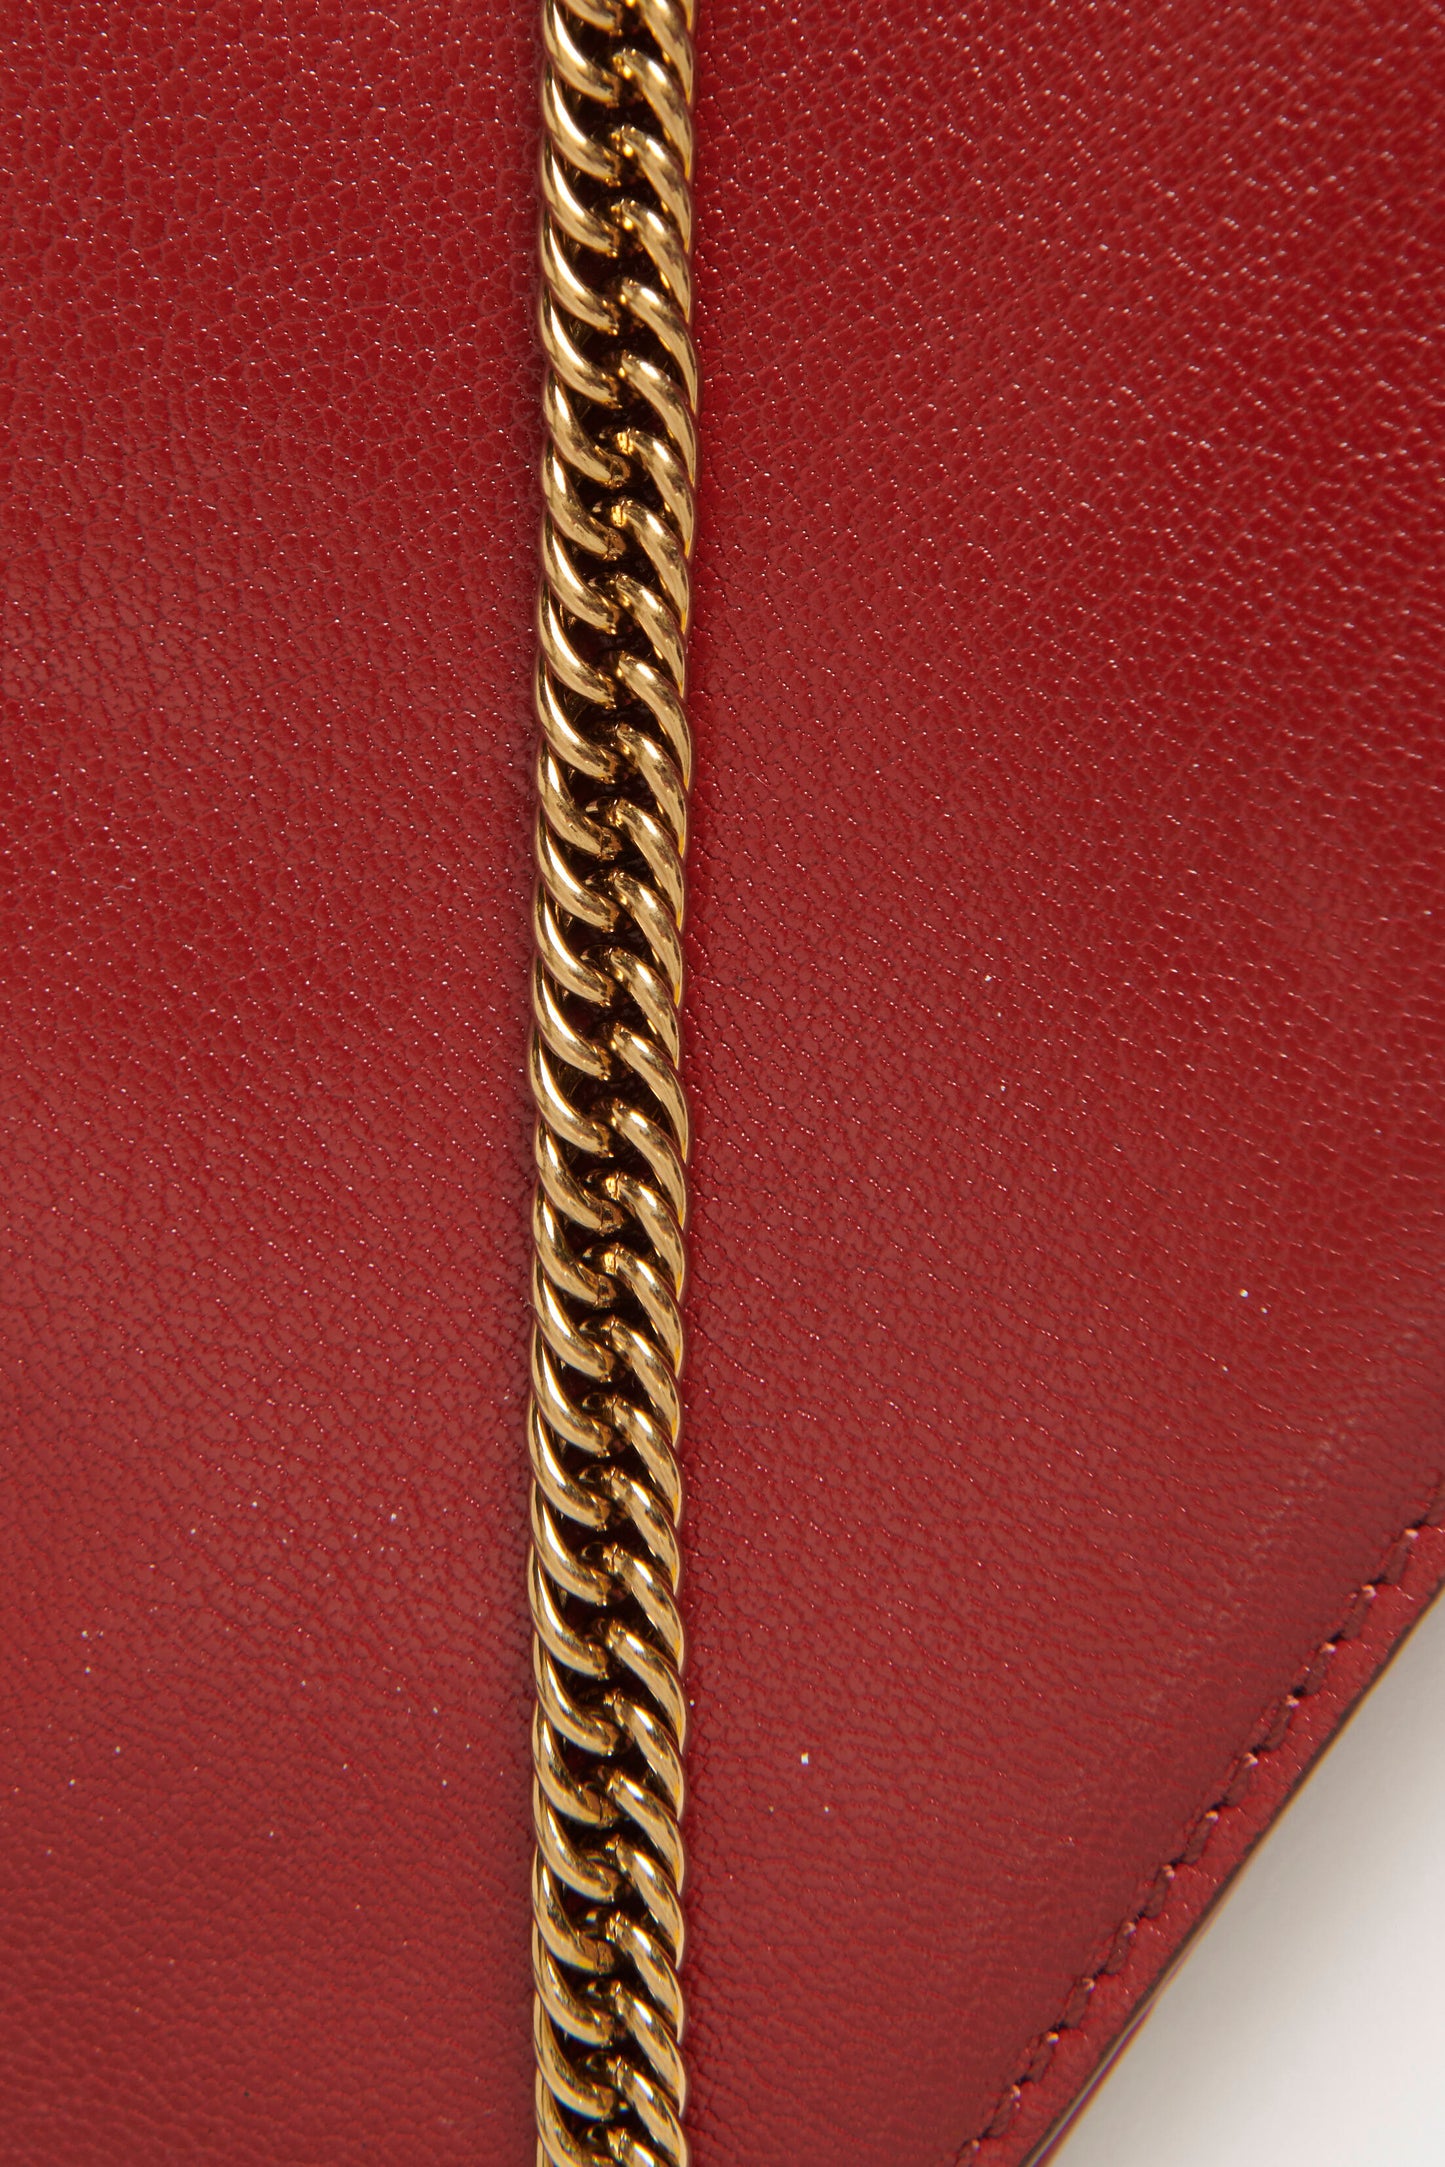 2018 Red Grained Leather Frame GV3 Bag